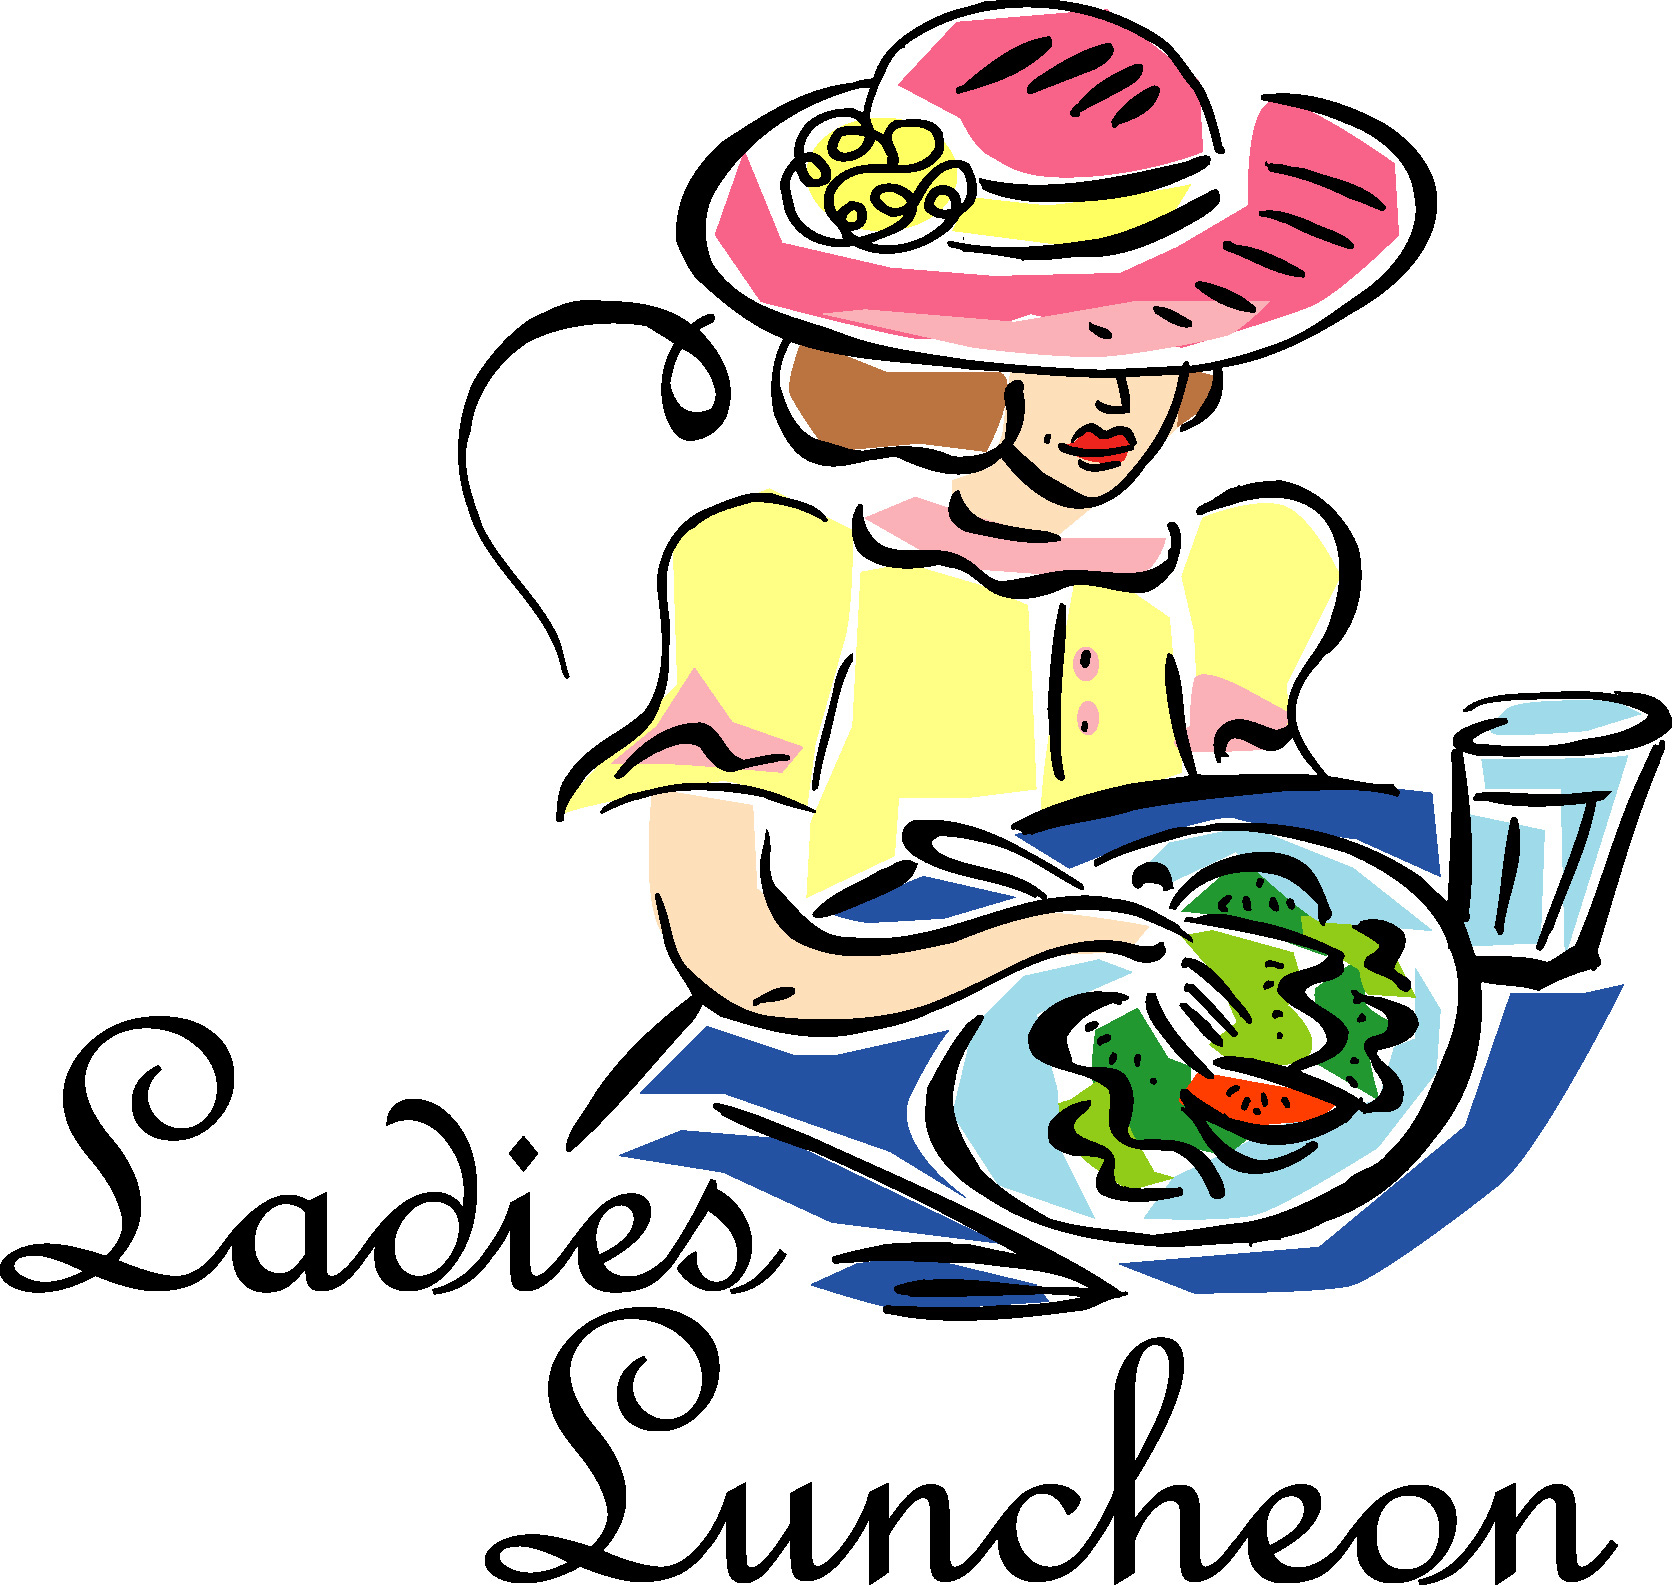 Out To Lunch Clipart